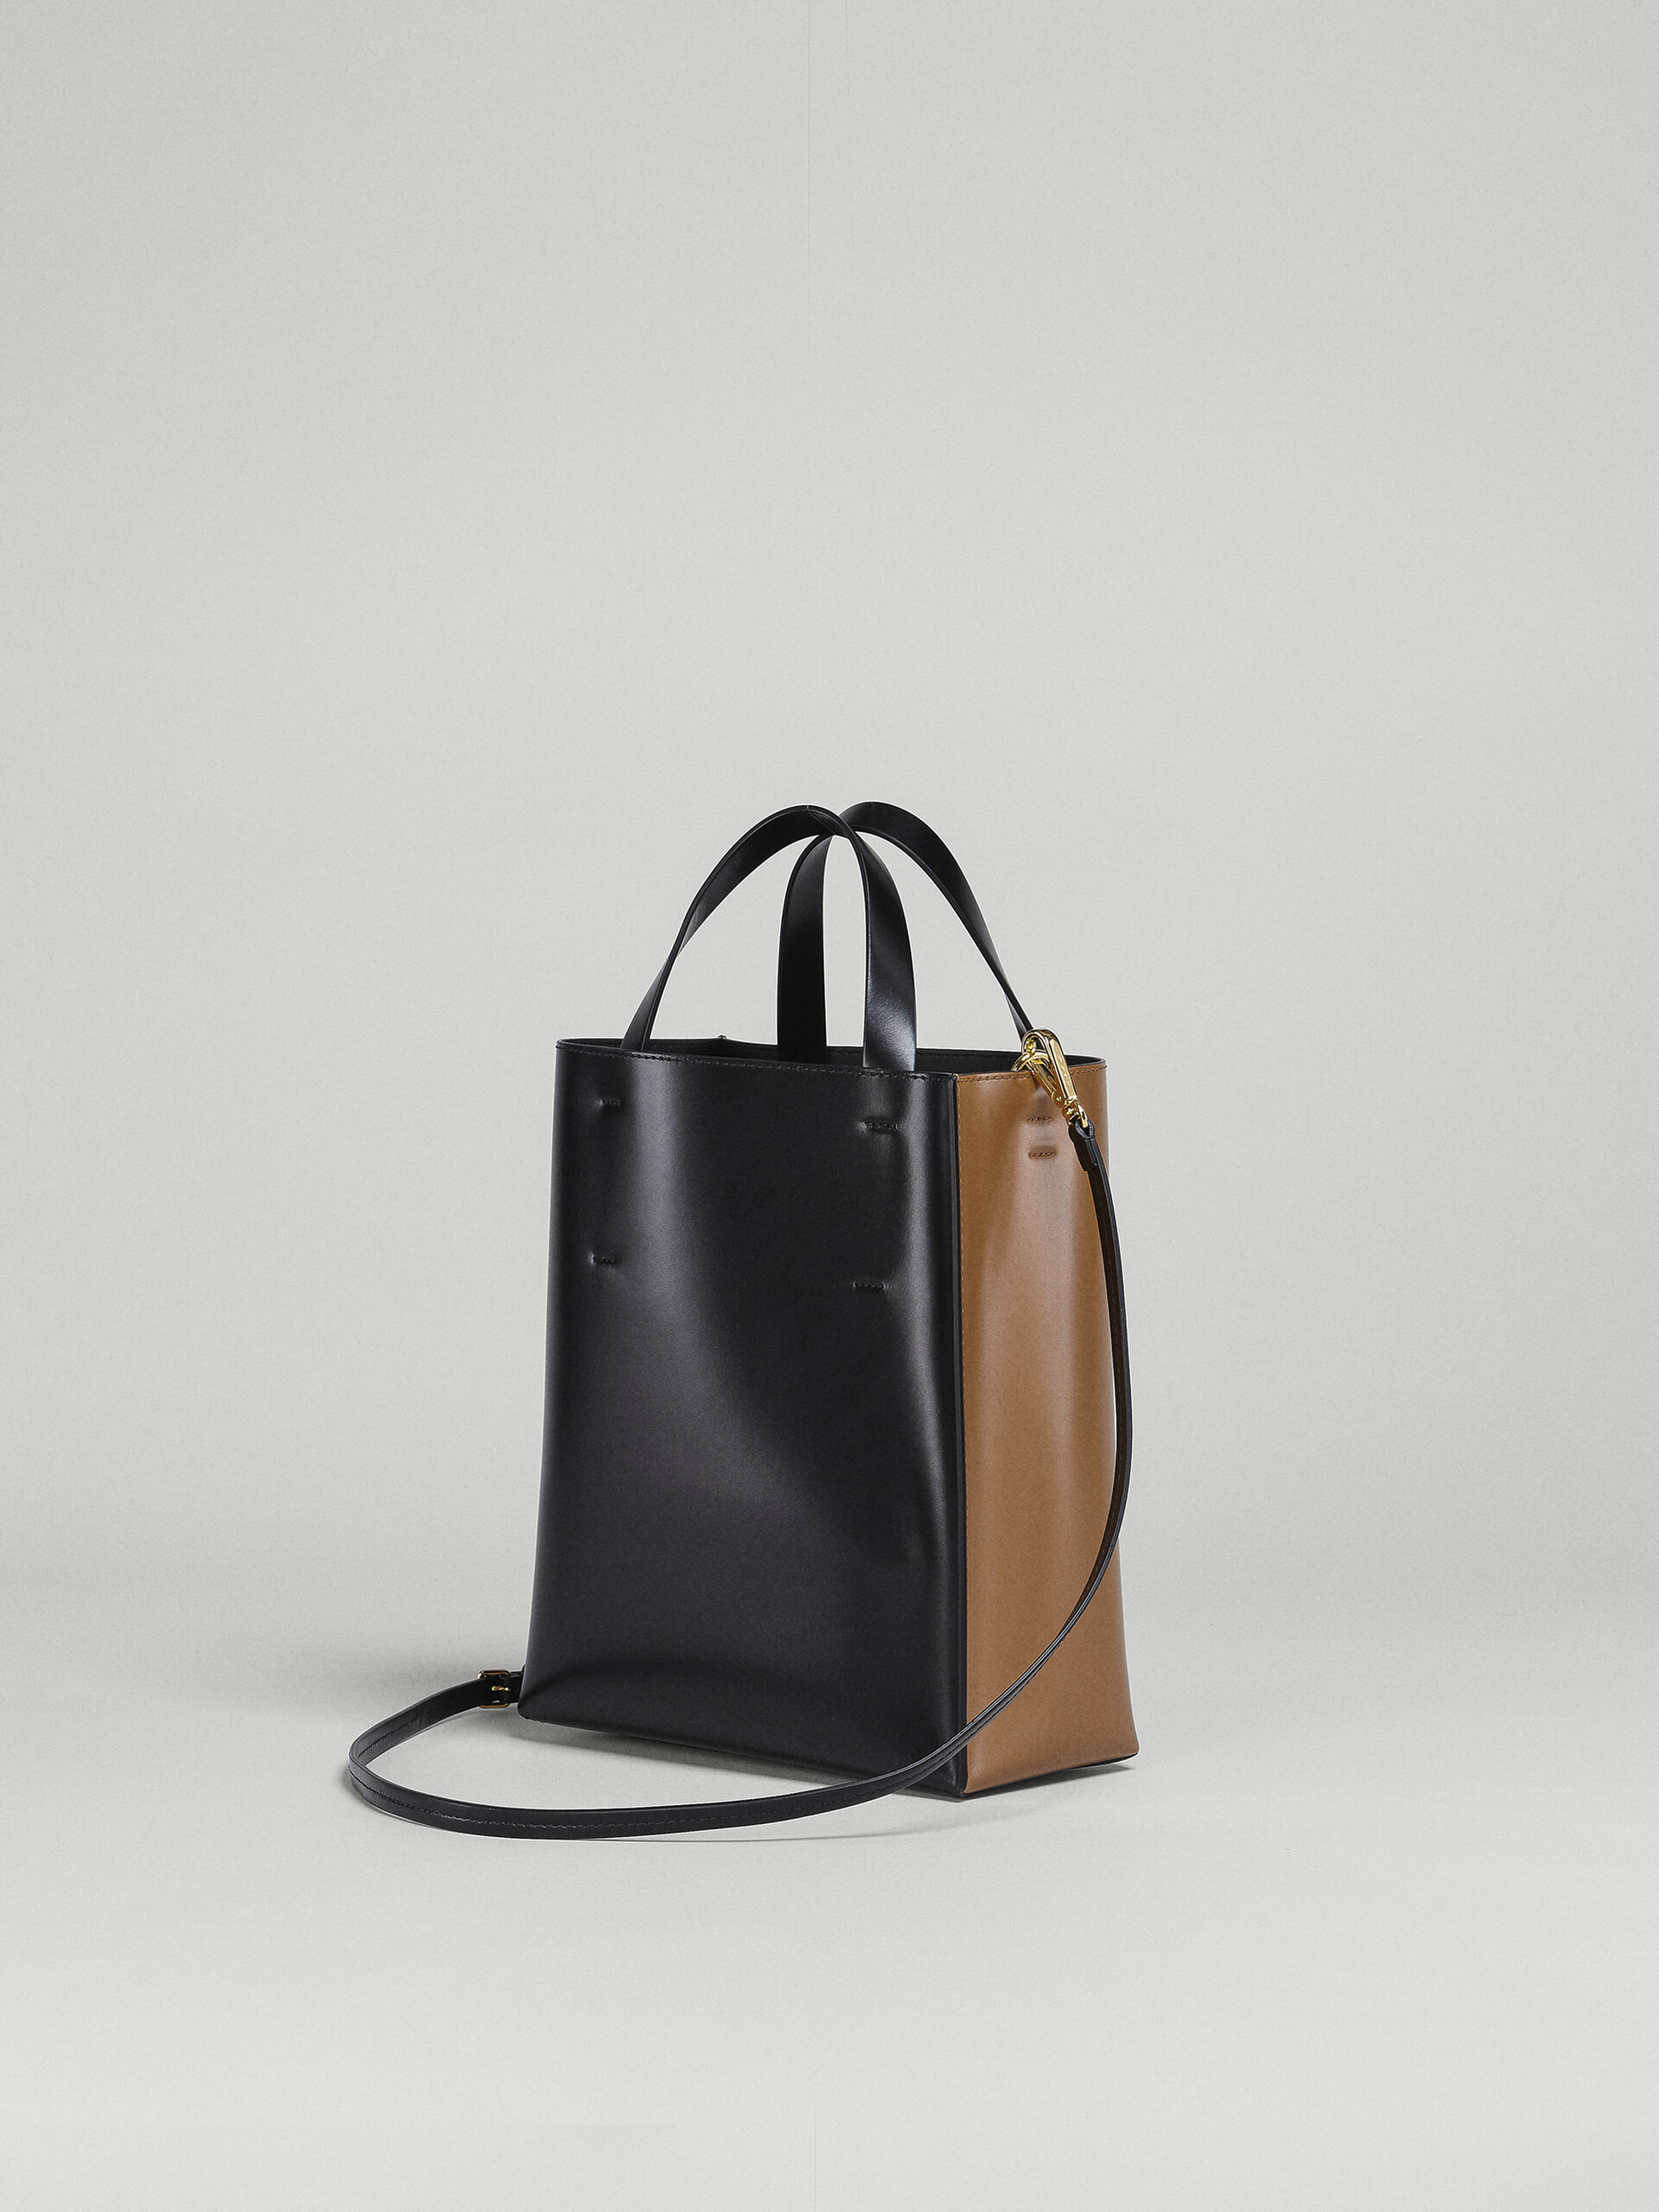 MUSEO small bag in shiny smooth calfskin - Shopping Bags - Image 3